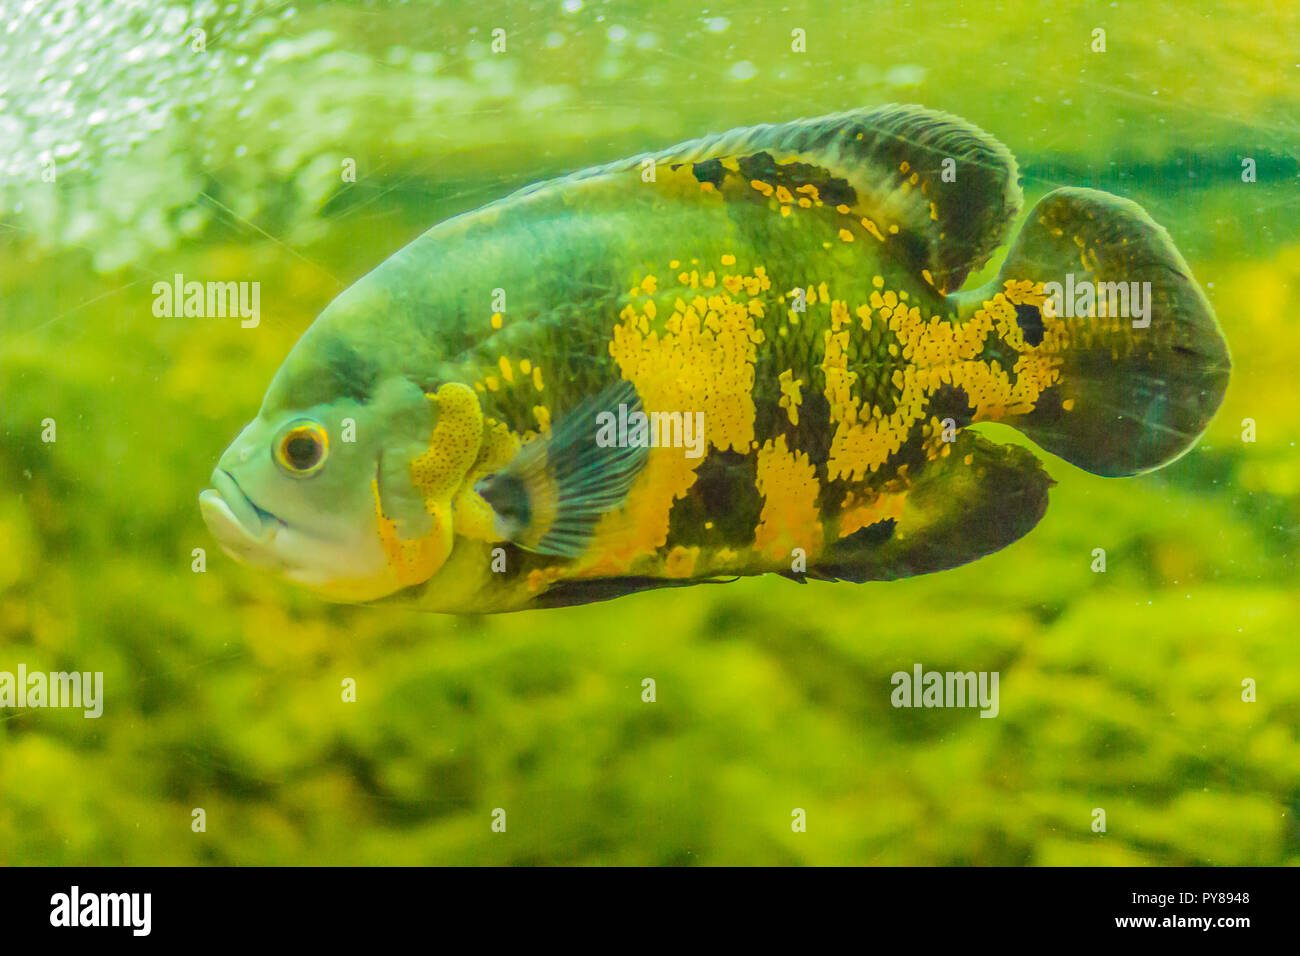 Cute oscar fish (Astronotus ocellatus) is a species of fish from the cichlid family known under a variety of common names, including tiger oscar, velv Stock Photo